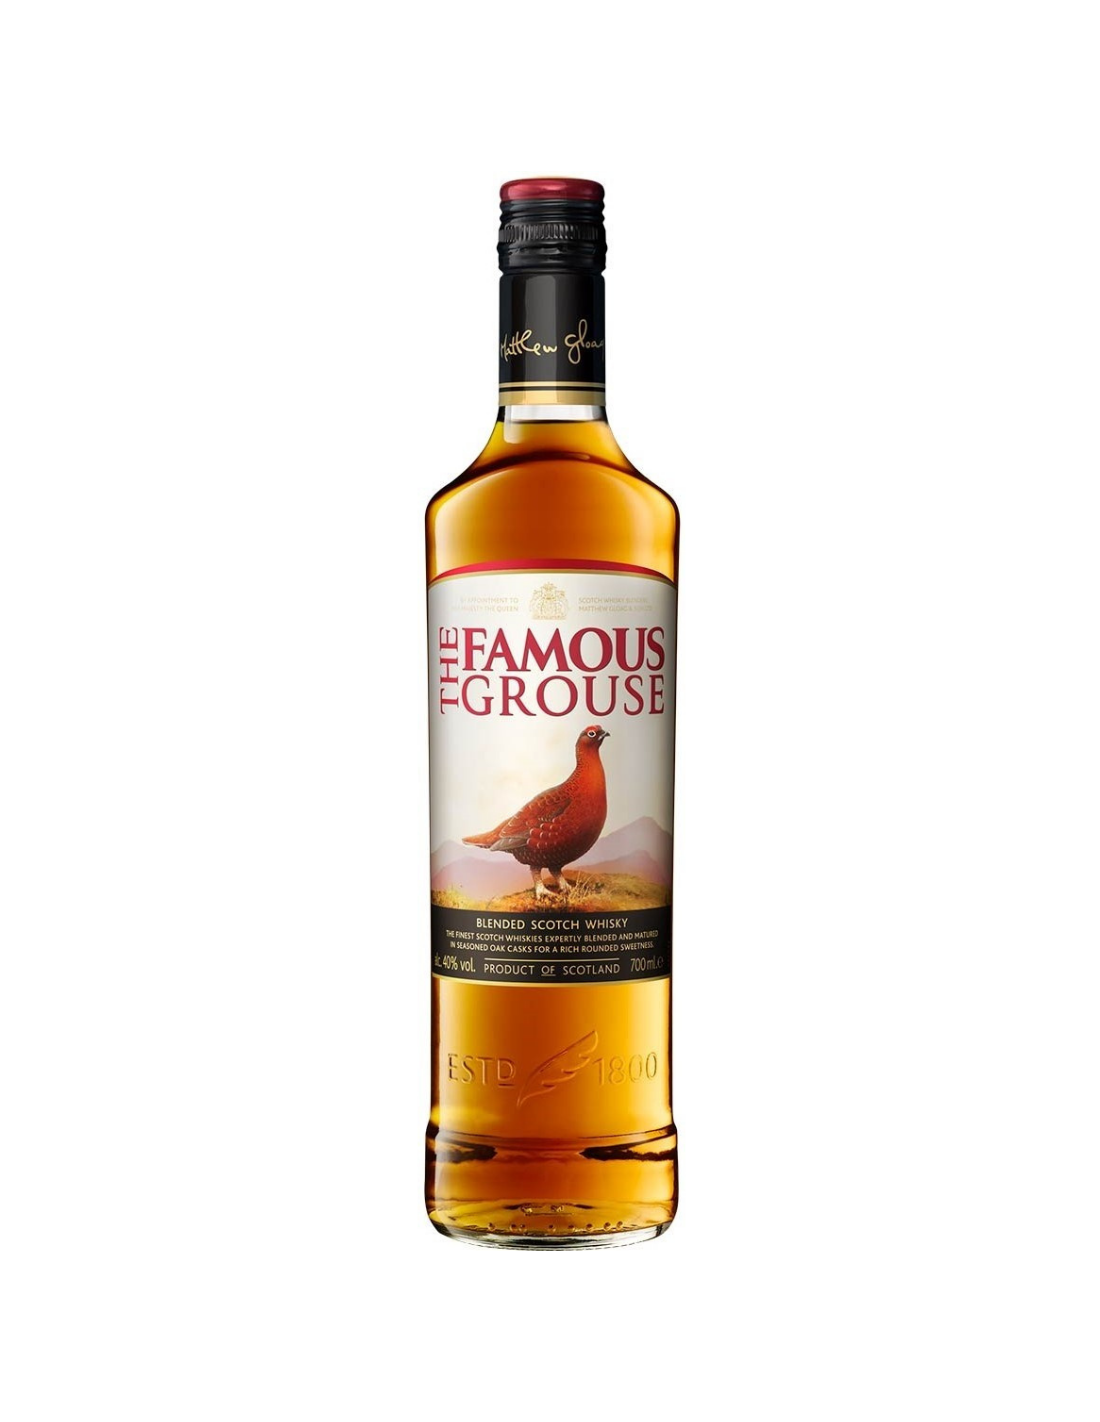 Whisky The Famous Grouse, 0.7L, 40% alc., Scotia alcooldiscount.ro